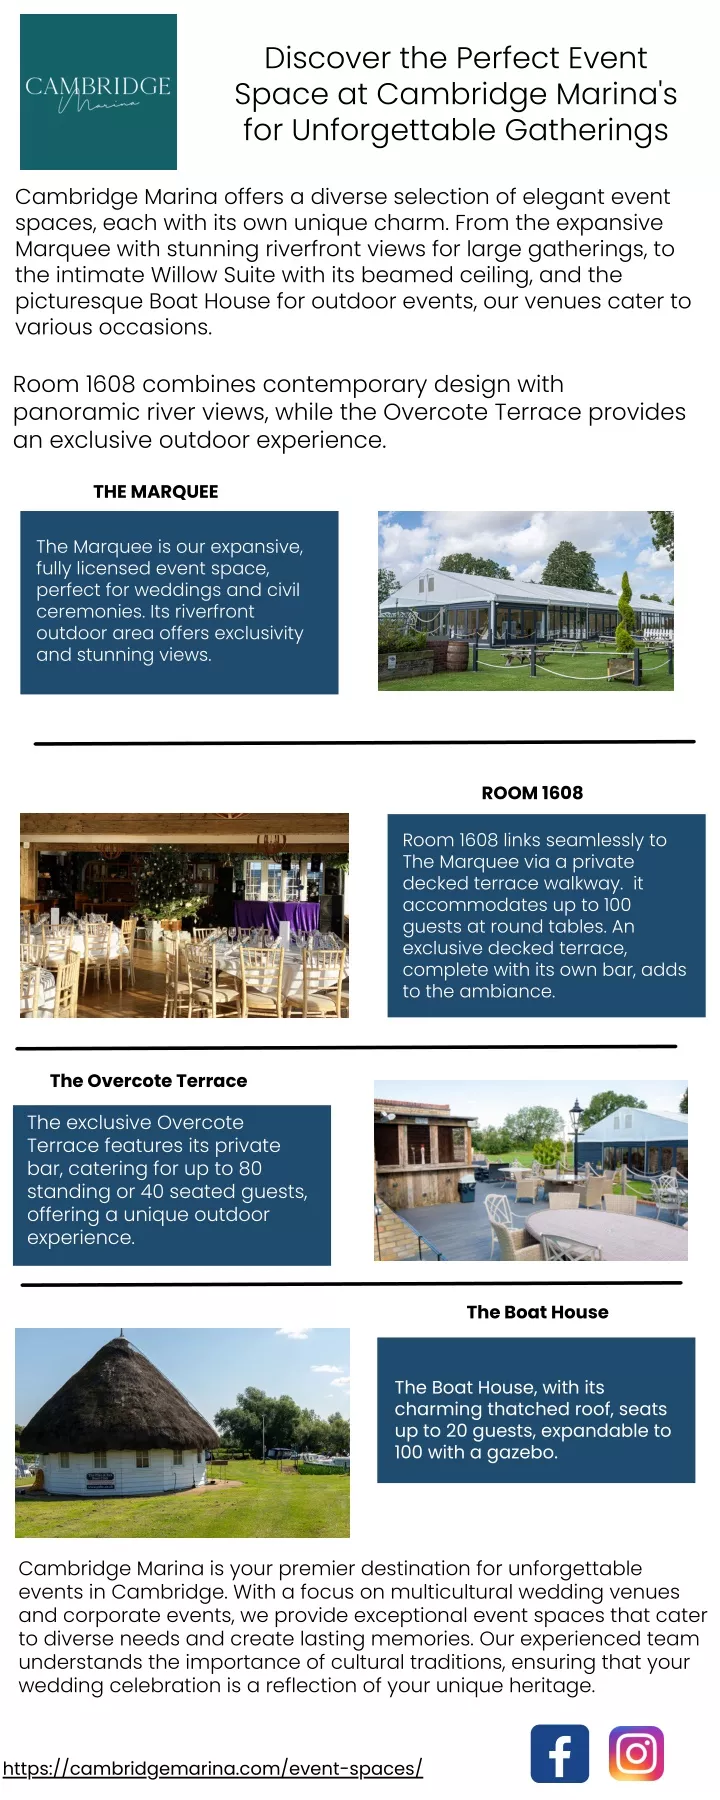 discover the perfect event space at cambridge